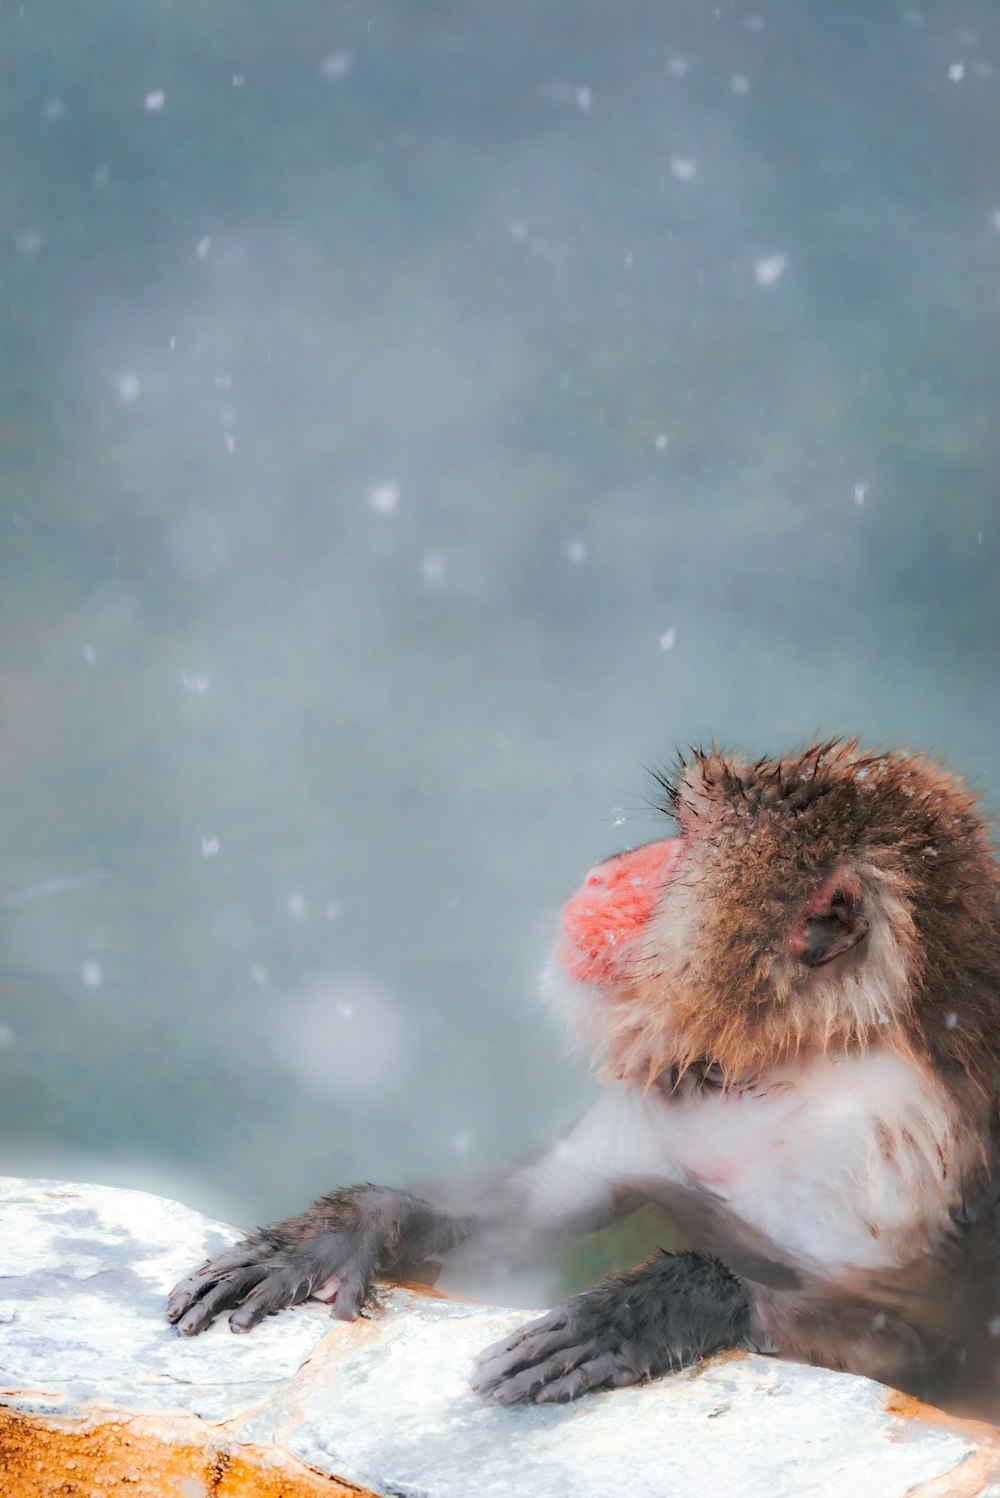 a monkey sitting on a ledge in the snow